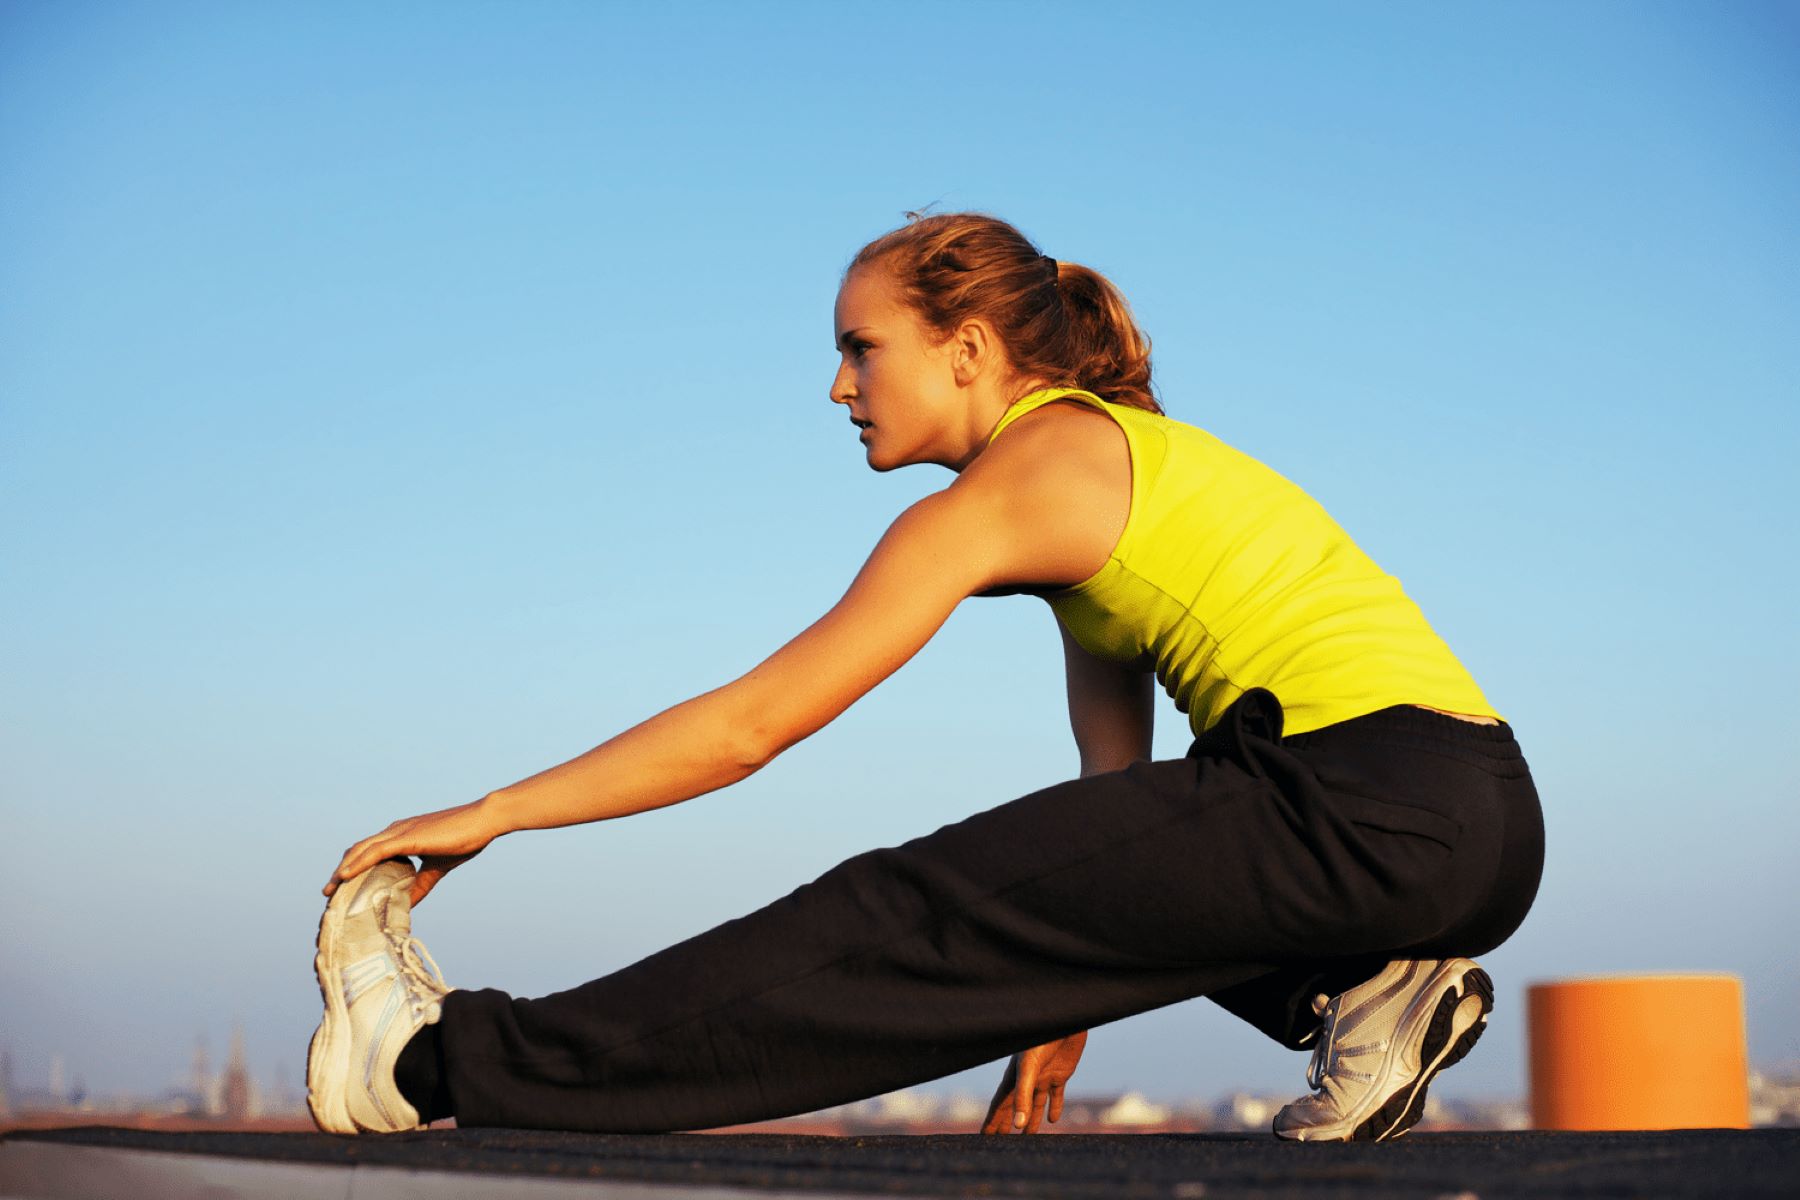 Top 4 Hamstring Stretches Recommended For Runners With Tight Hamstrings